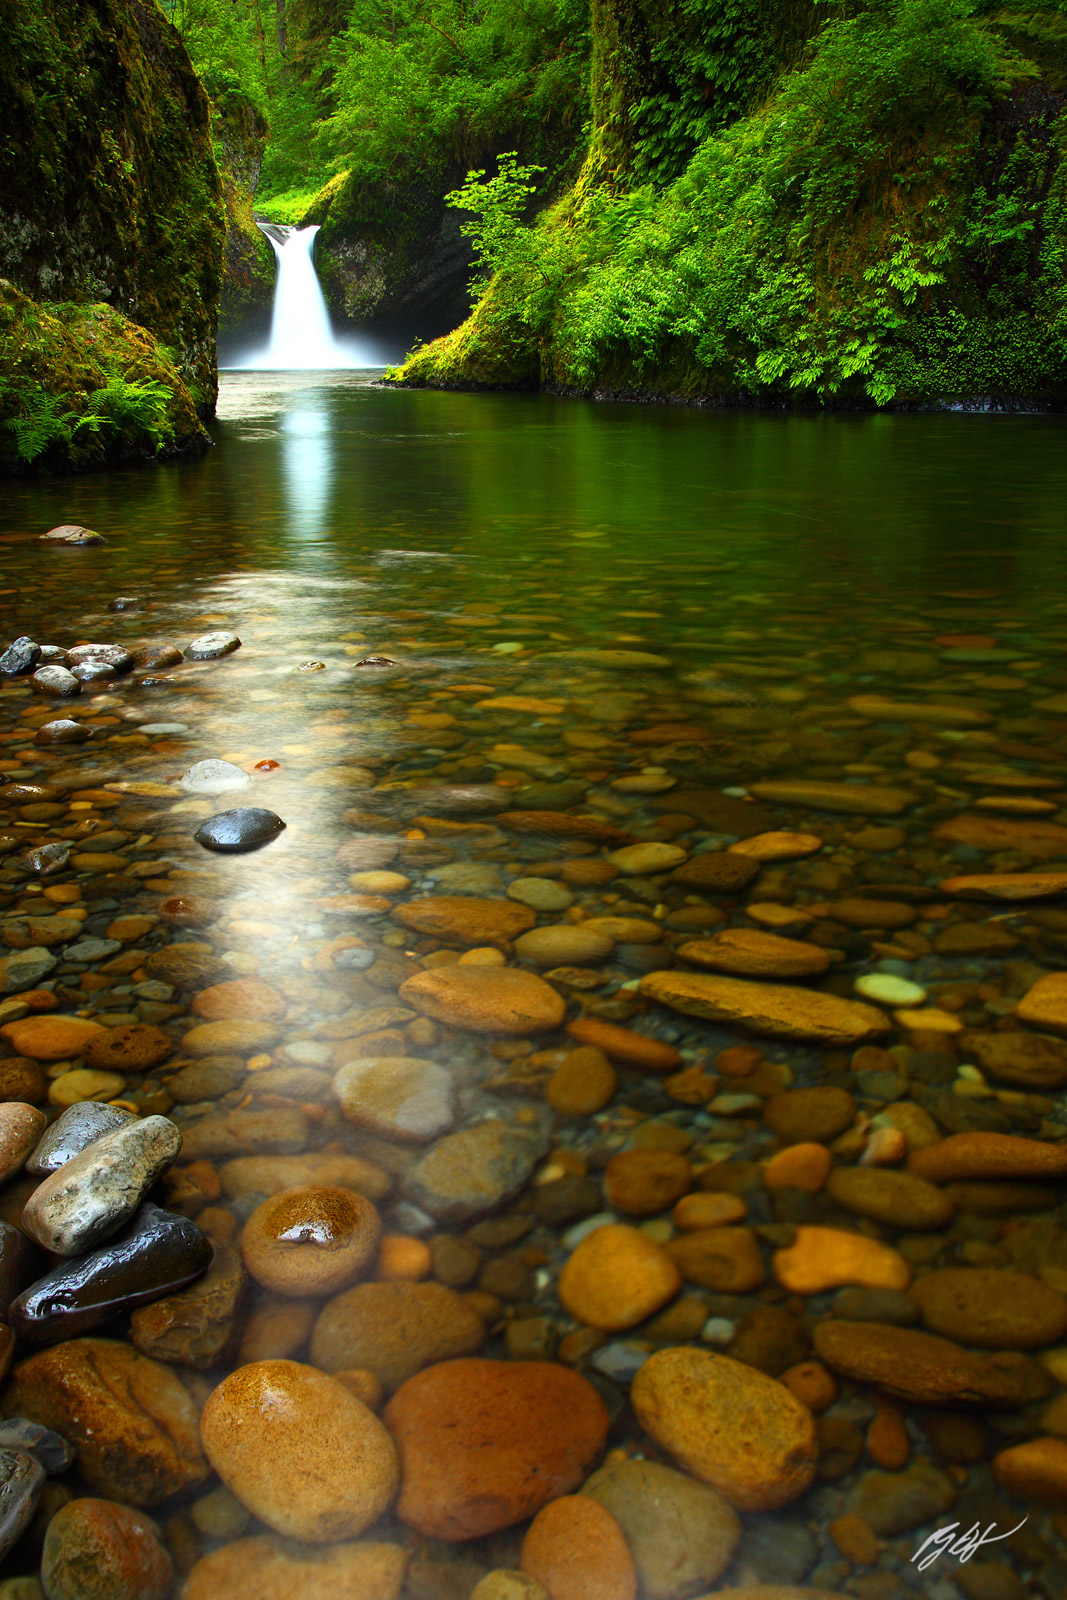 Punch Bowl Falls in the Eagle Creek Gorge in the Columbia River Gorge, Oregon